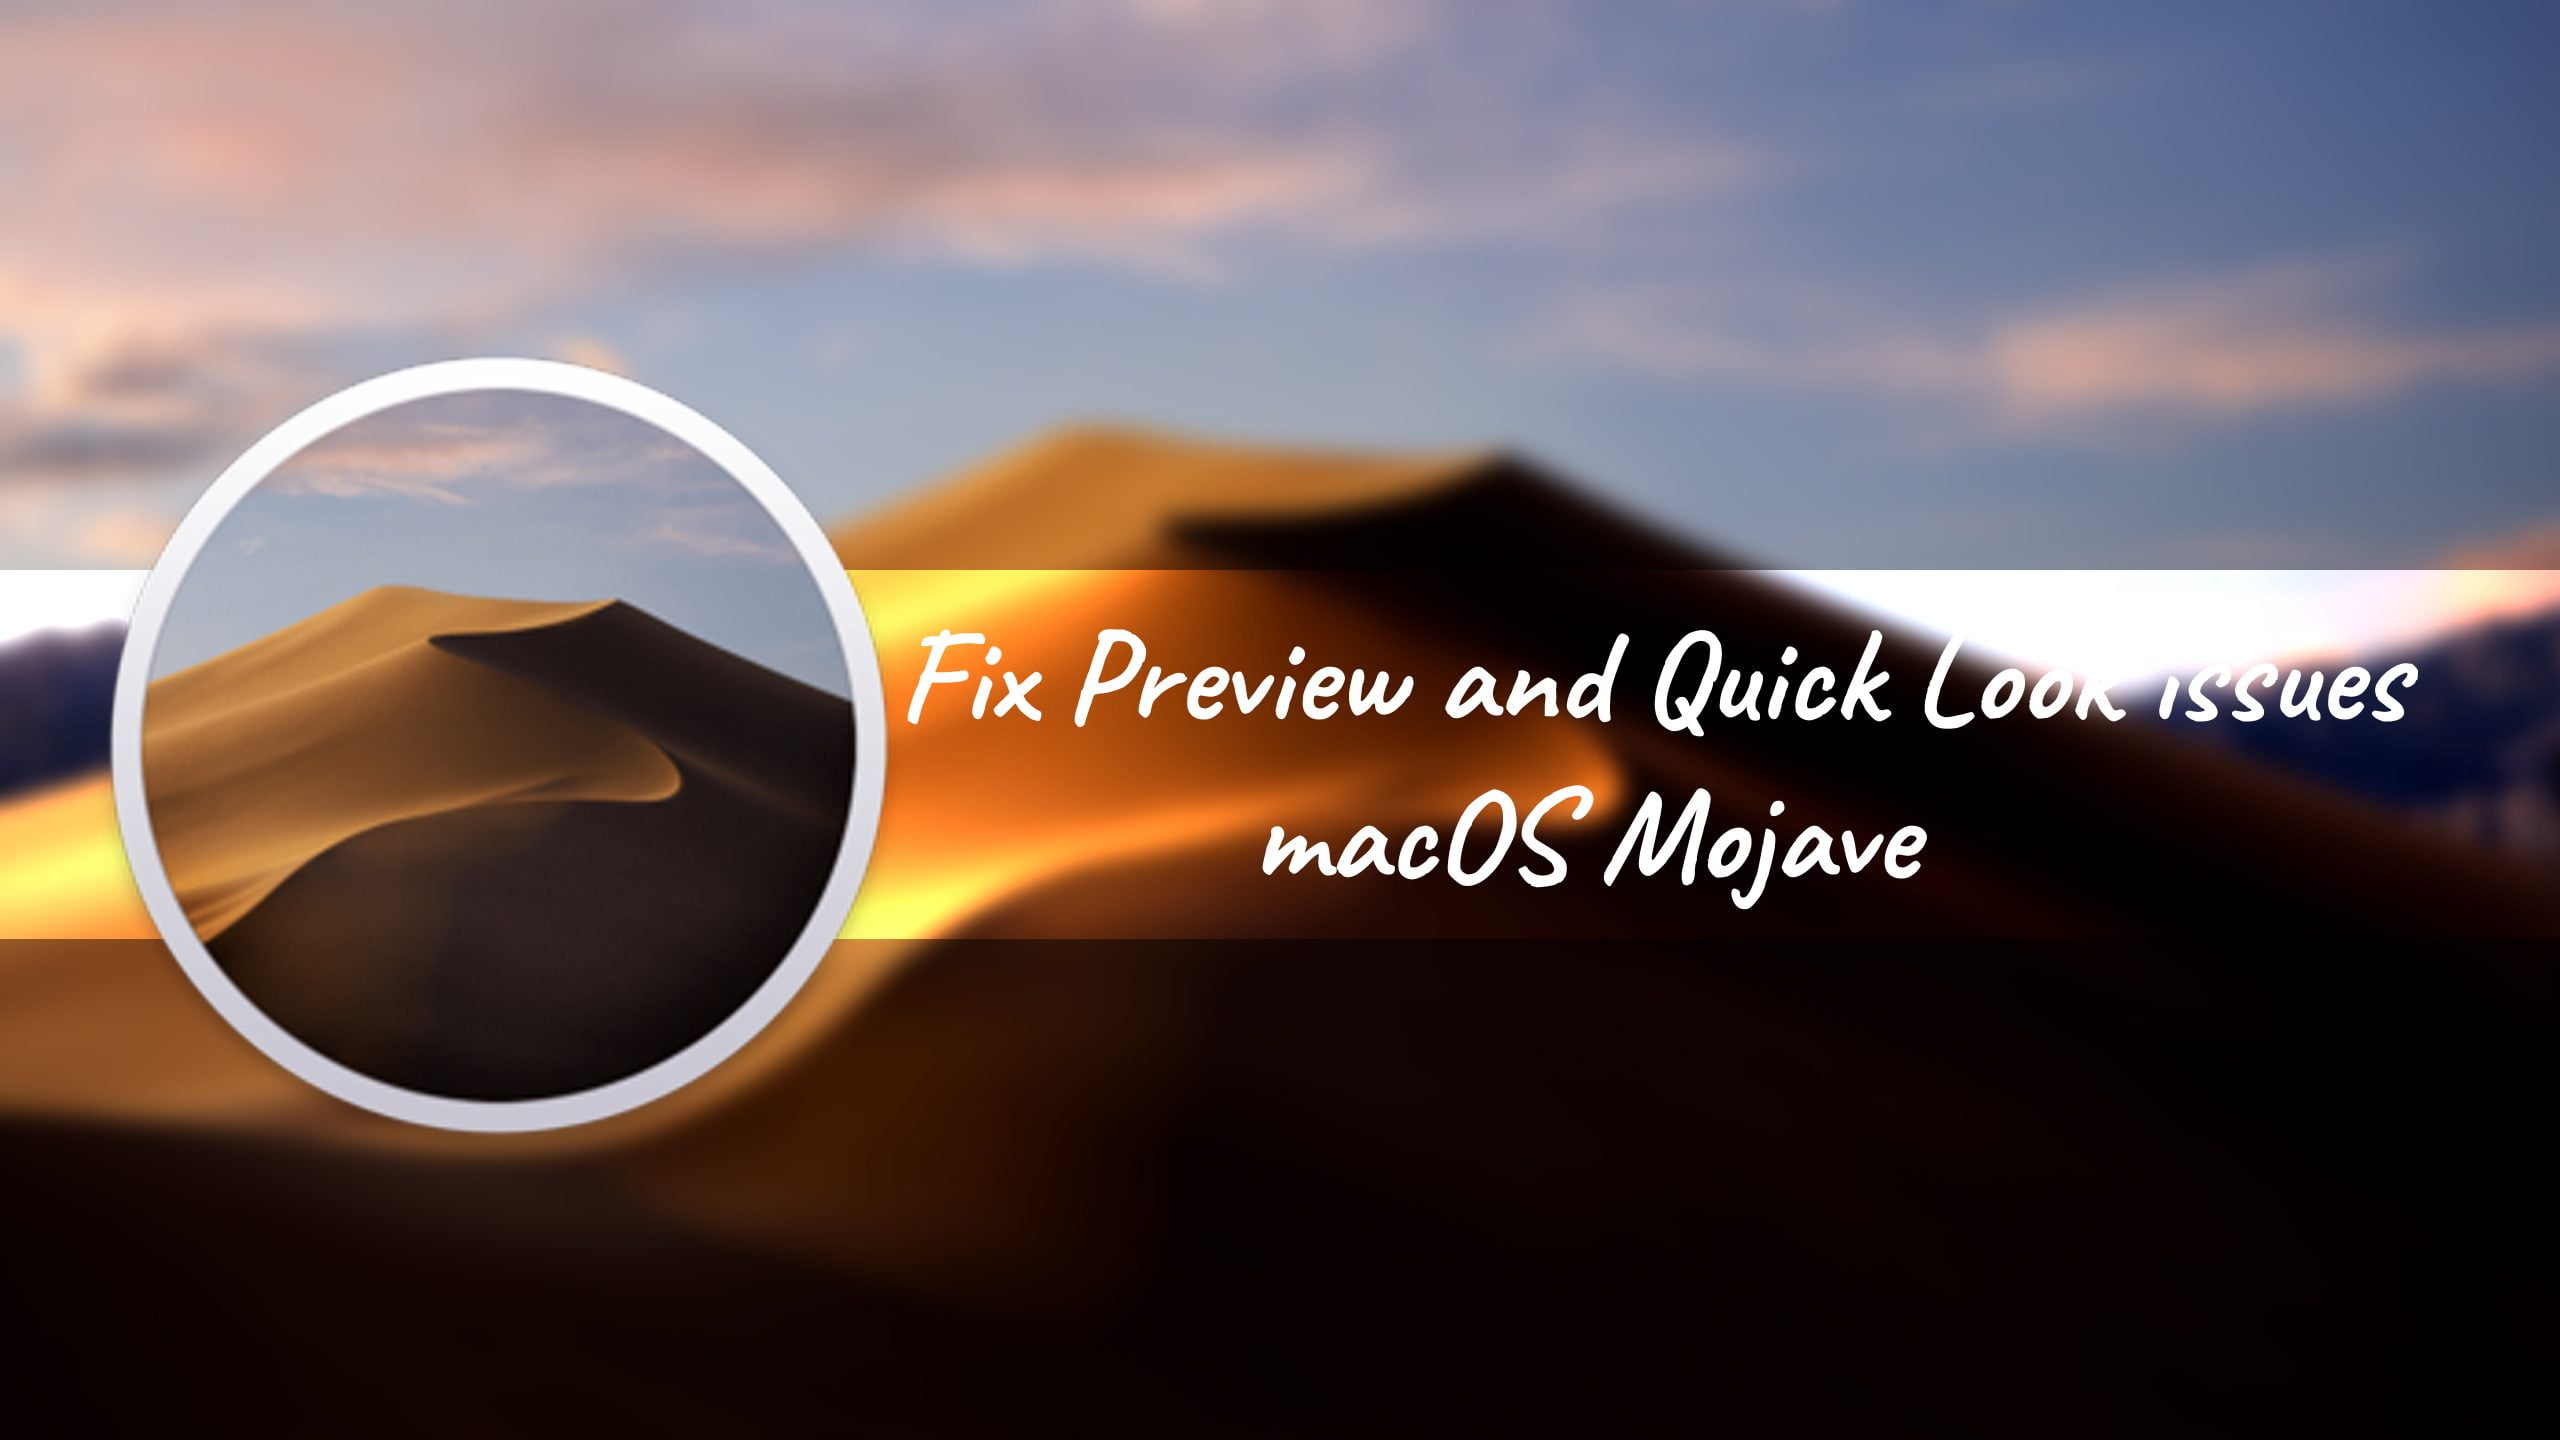 How to Fix Preview and Quick Look issues on macOS Mojave